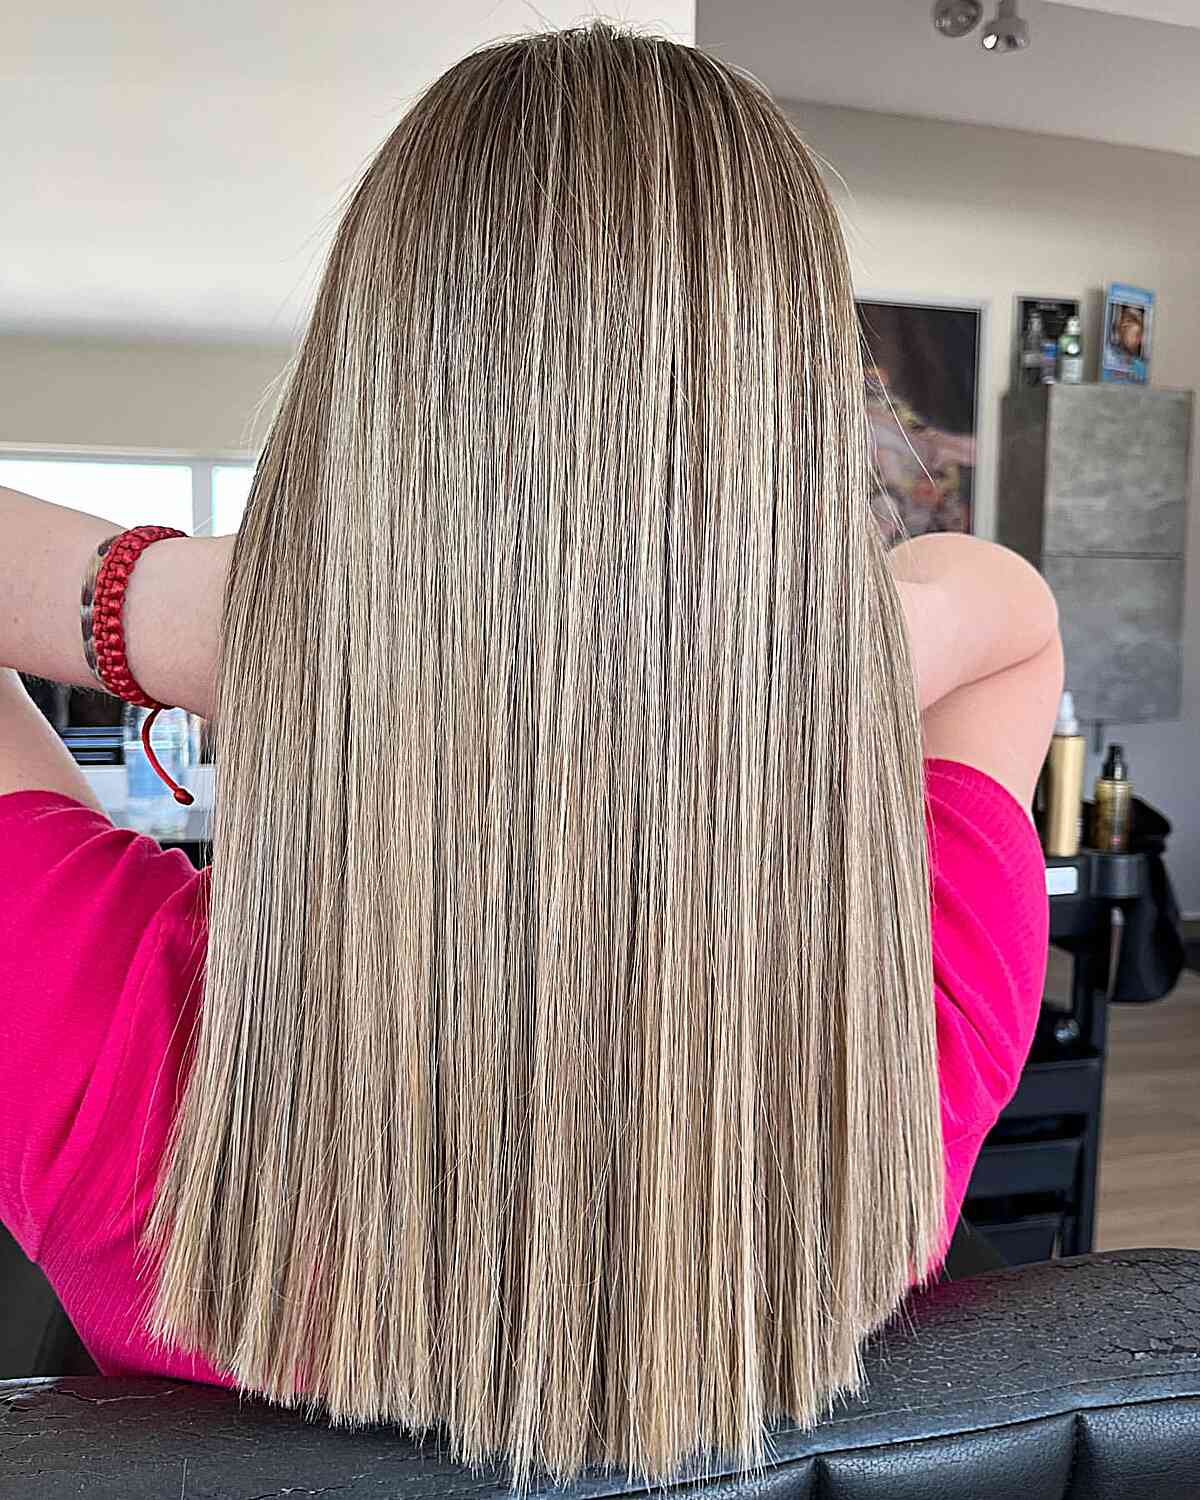 Long Dark Blonde Balayage Straight Hair with Textured Ends